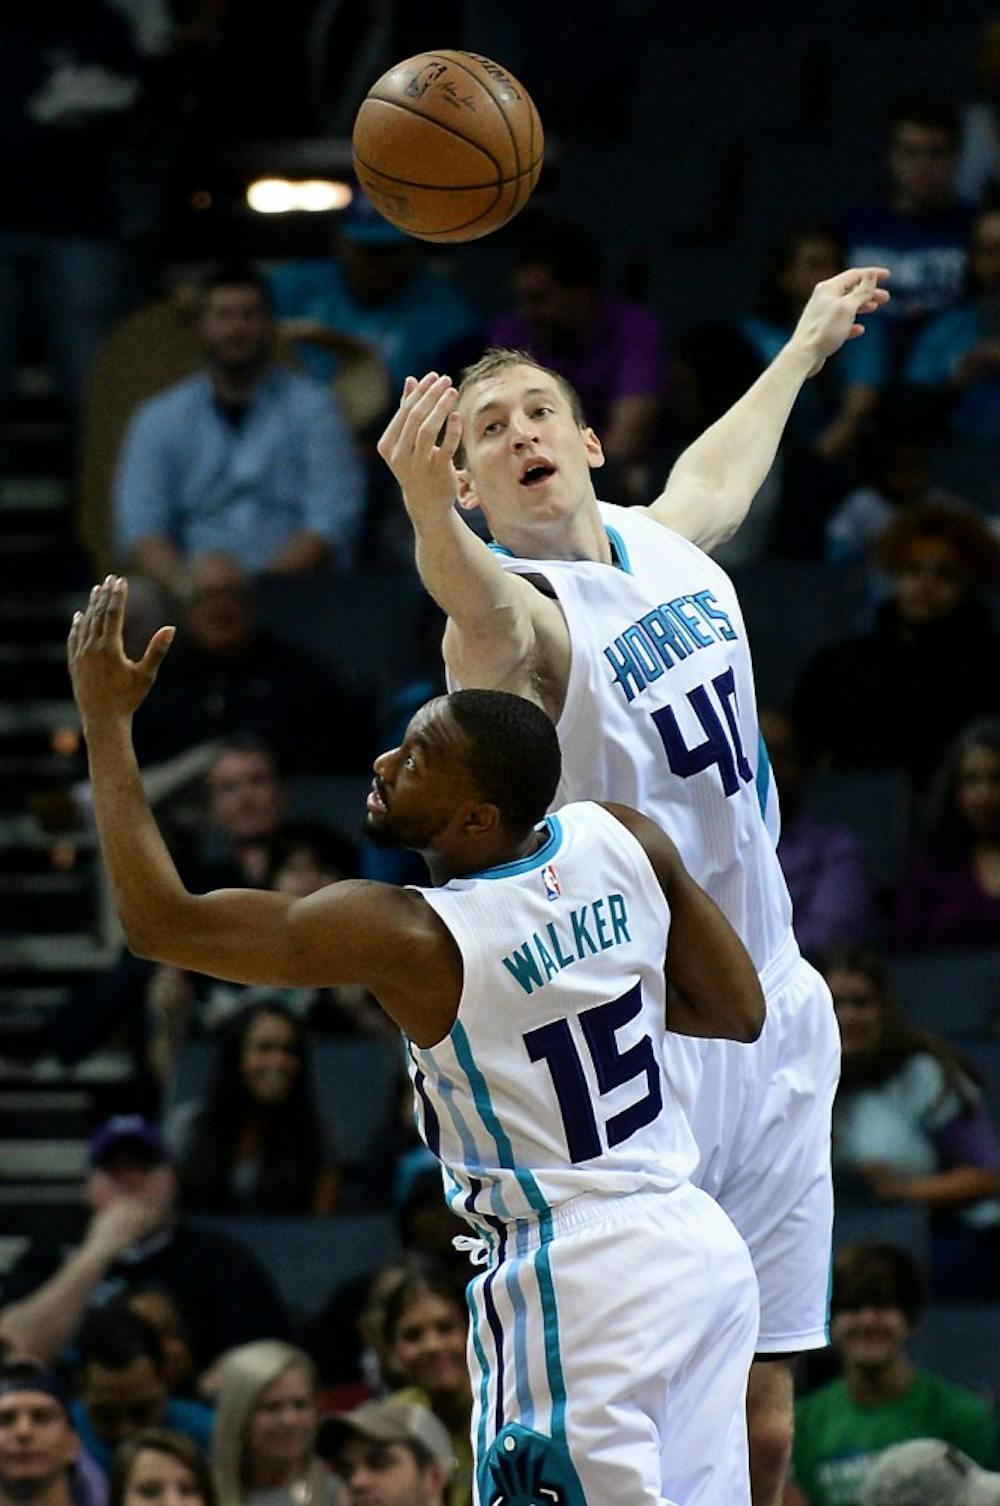 The Charlotte Hornets' Cody Zeller, top, fights for control of a rebound with teammate Kemba Walker (15) during first-half action against the Denver Nuggets on Friday, March 31, 2017, at the Spectrum Center in Charlotte, N.C. (Jeff Siner/Charlotte Observer/TNS)